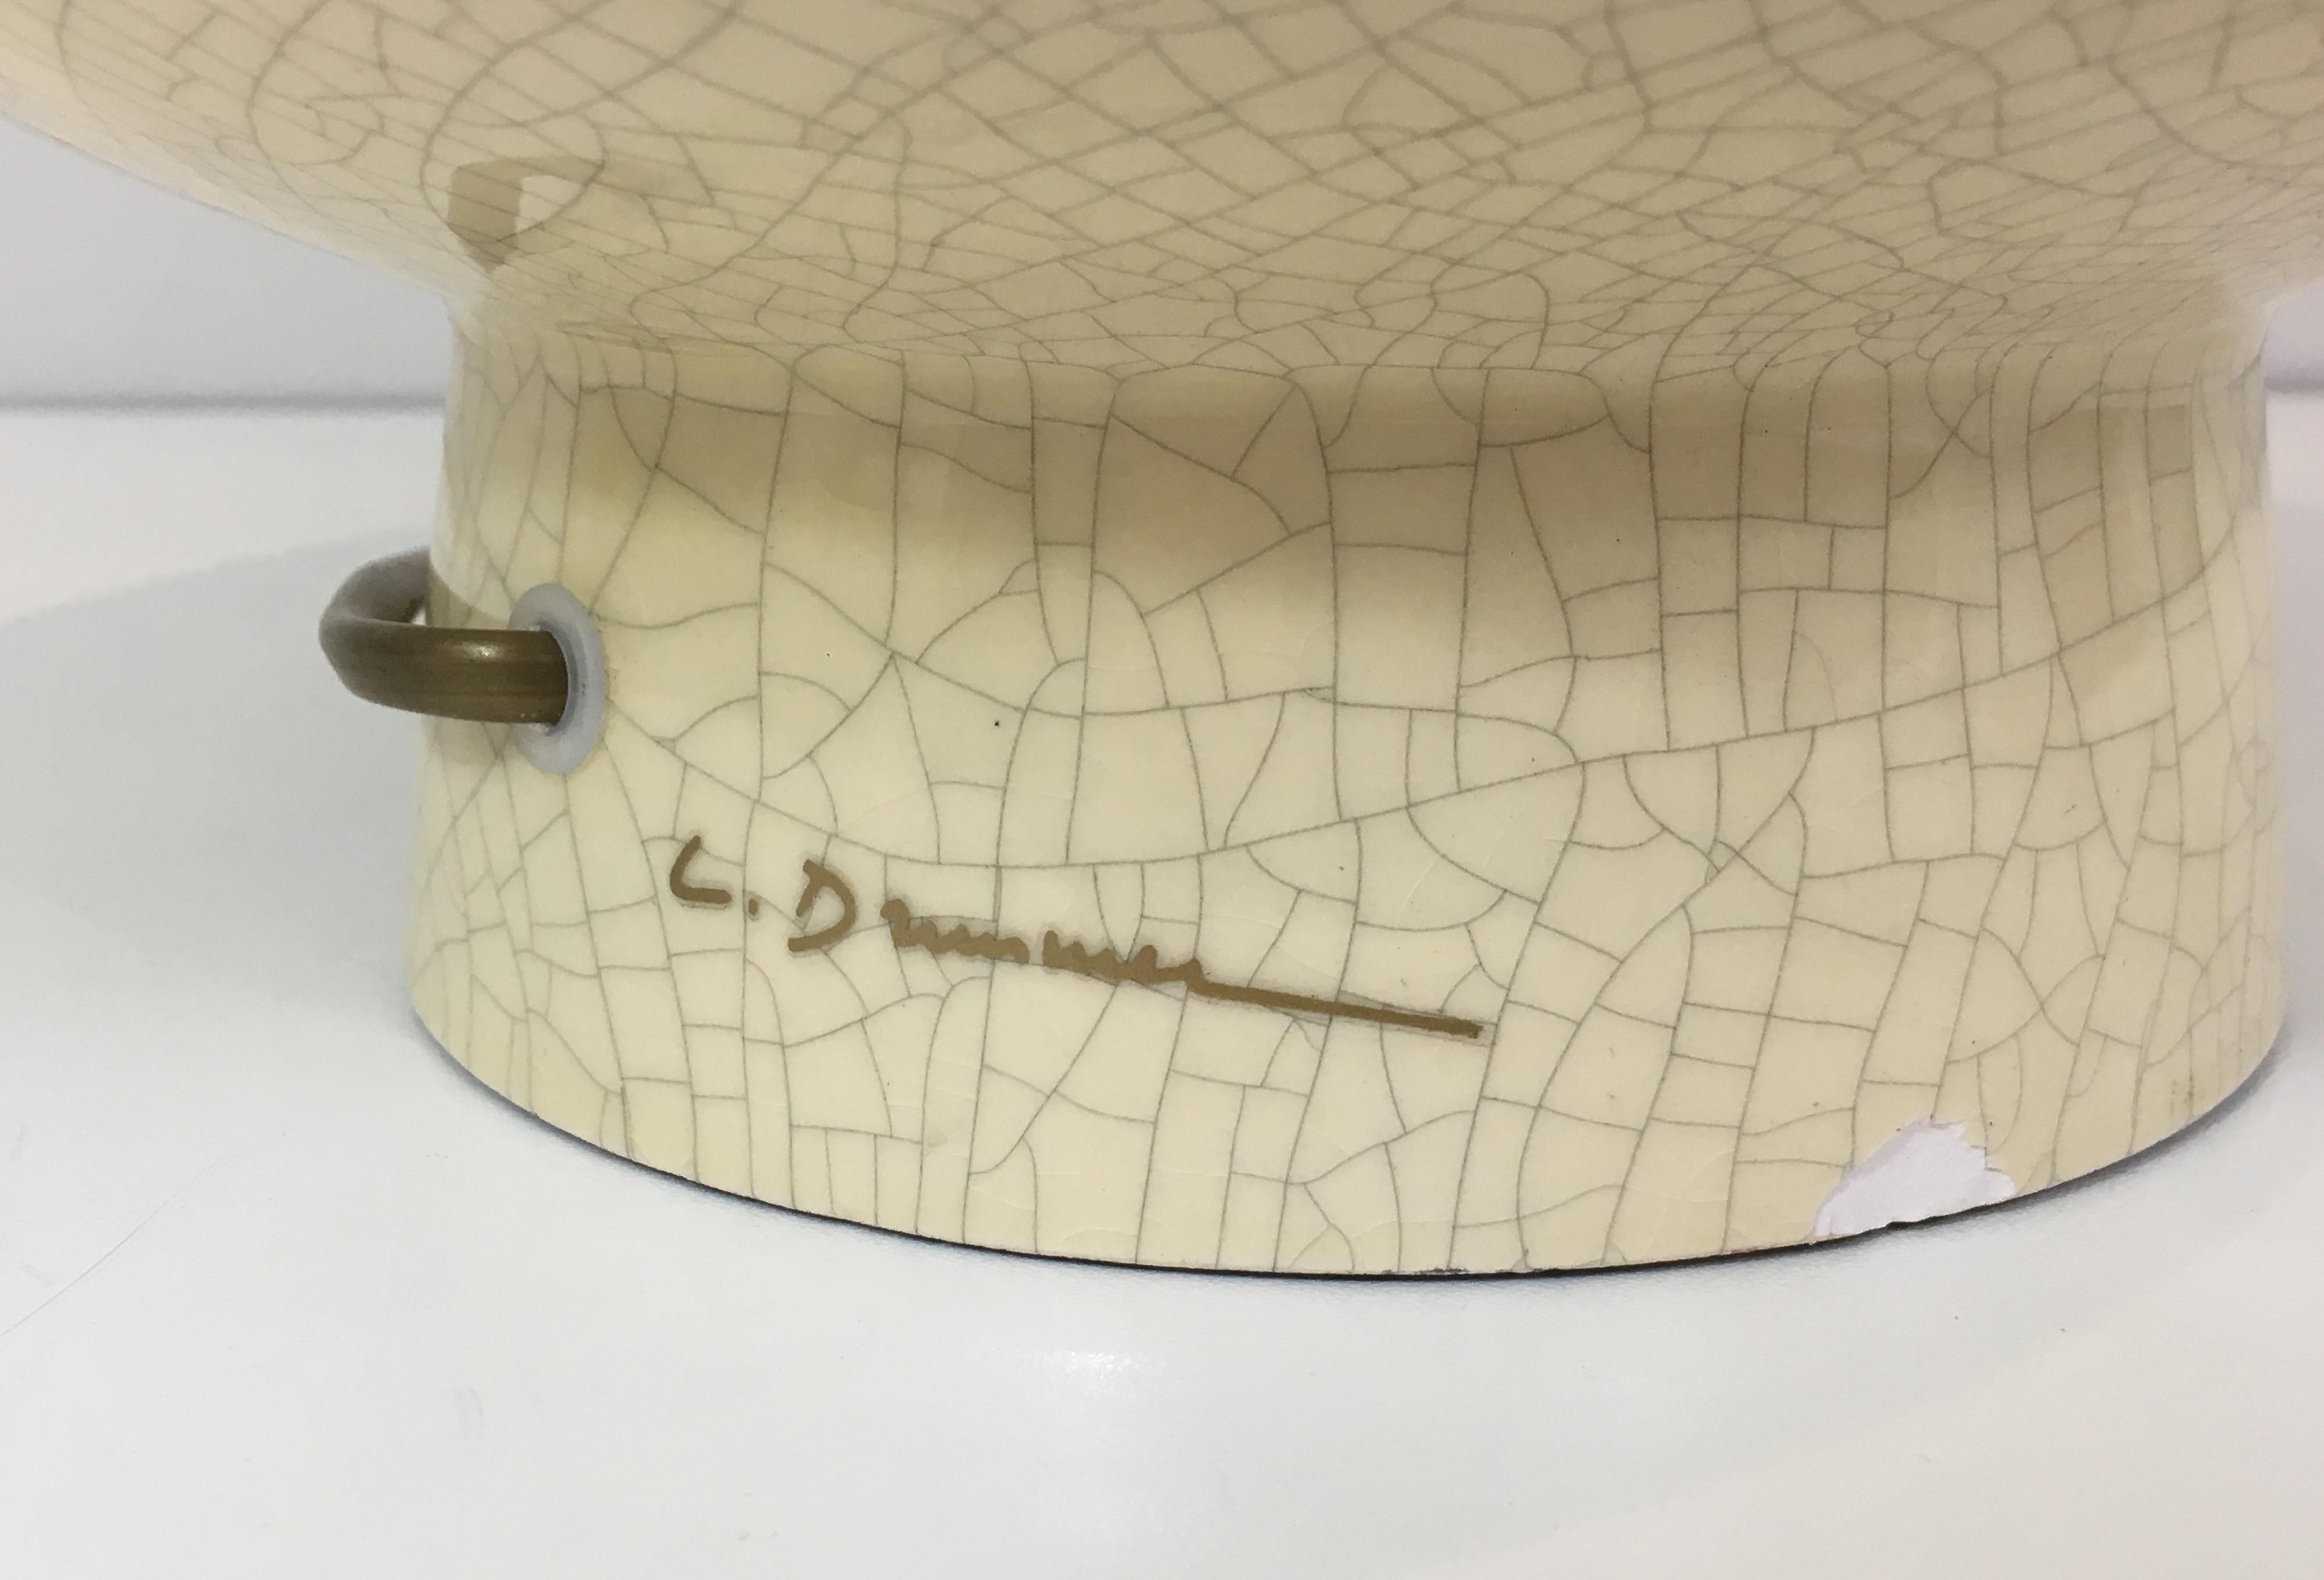 By L Drummer, Cracked Ceramic Lamp with Silver and Gold Flower Decoration on the 6